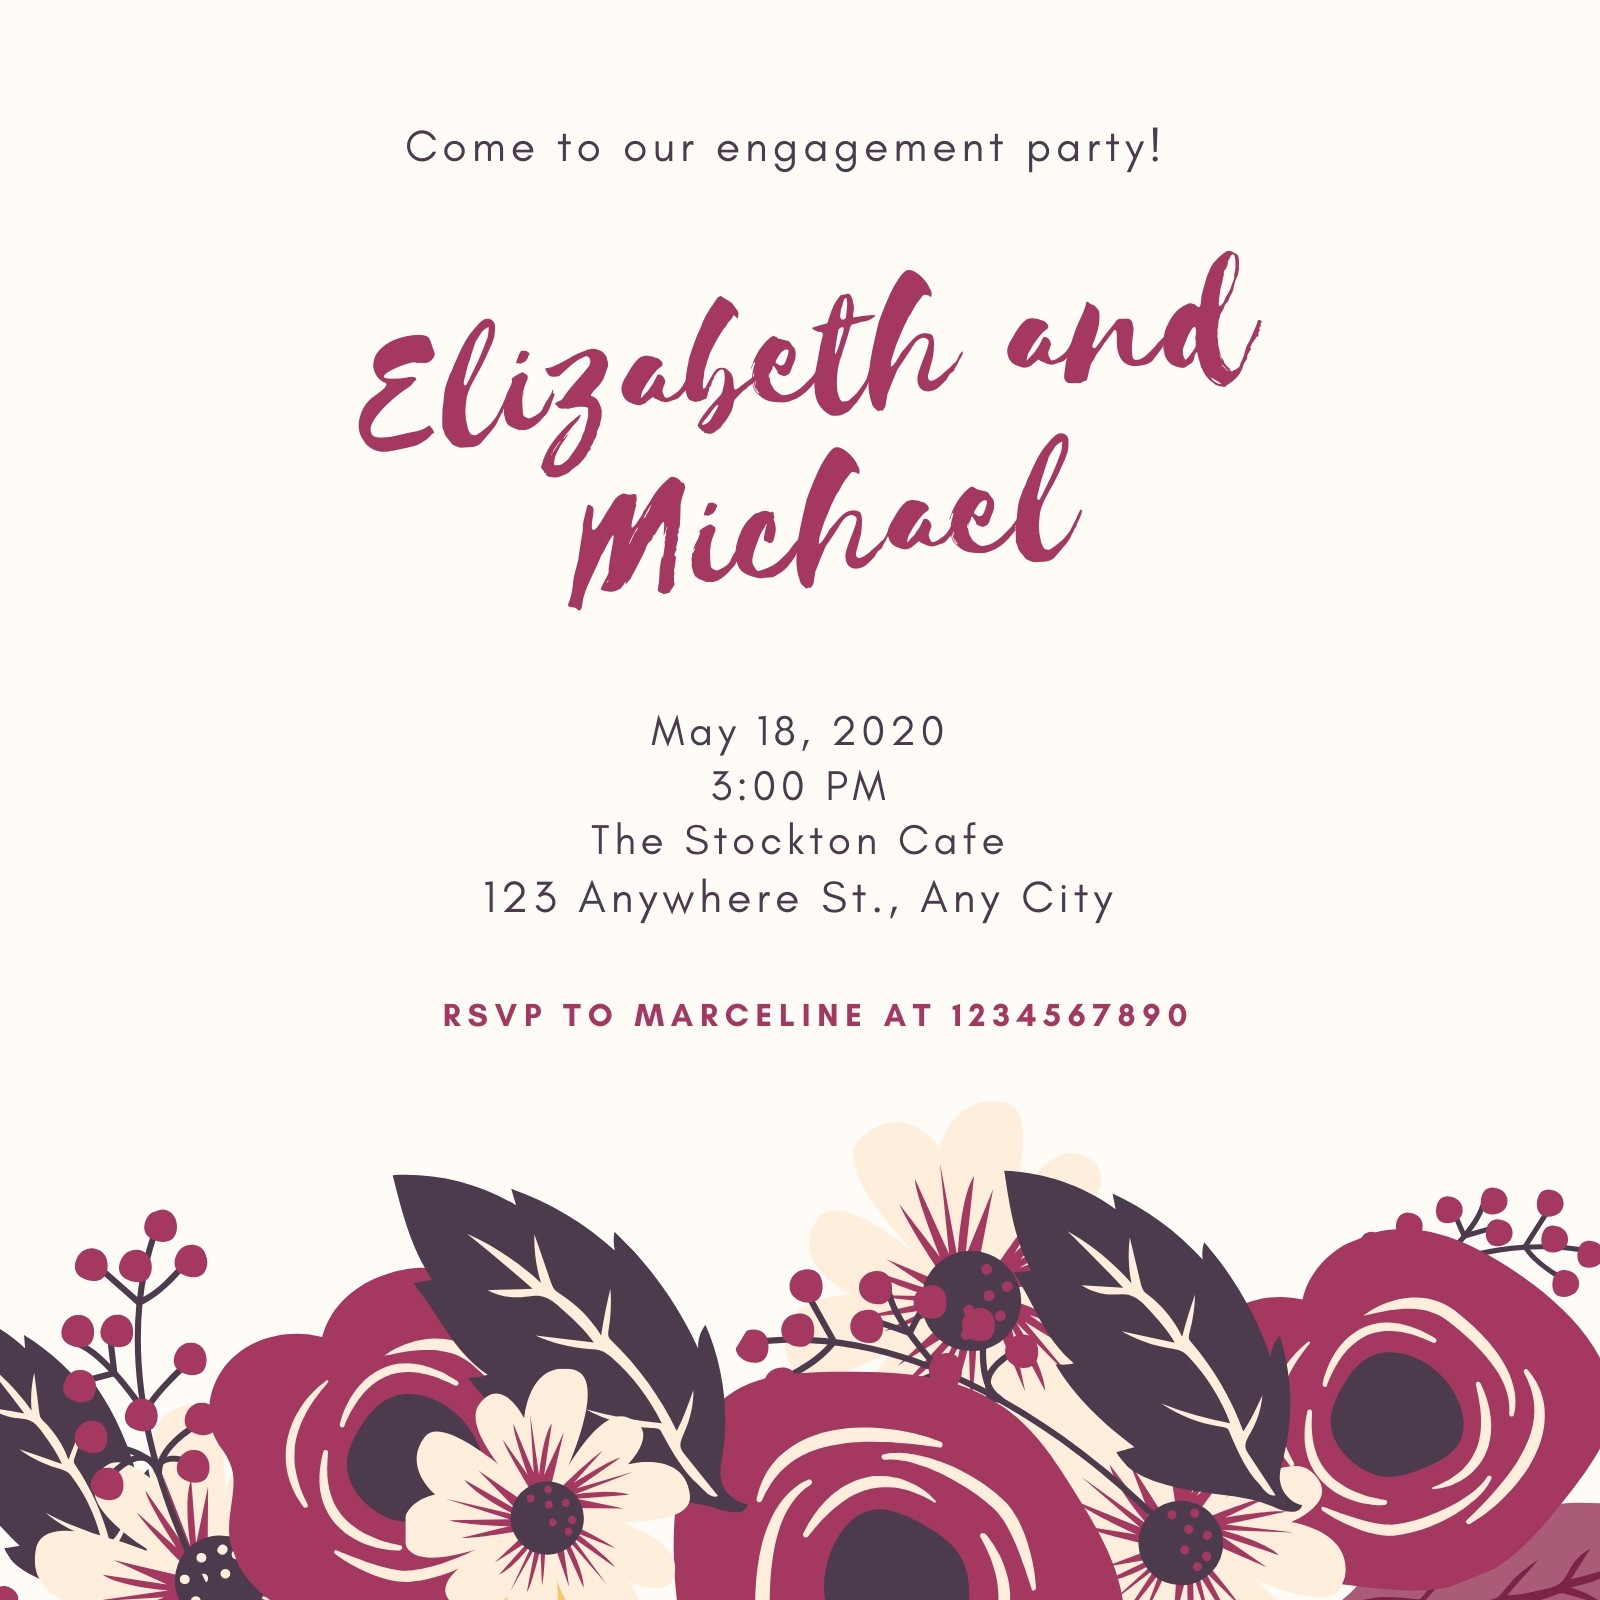 Customize 49+ Engagement Party Invitations Templates Online - Canva